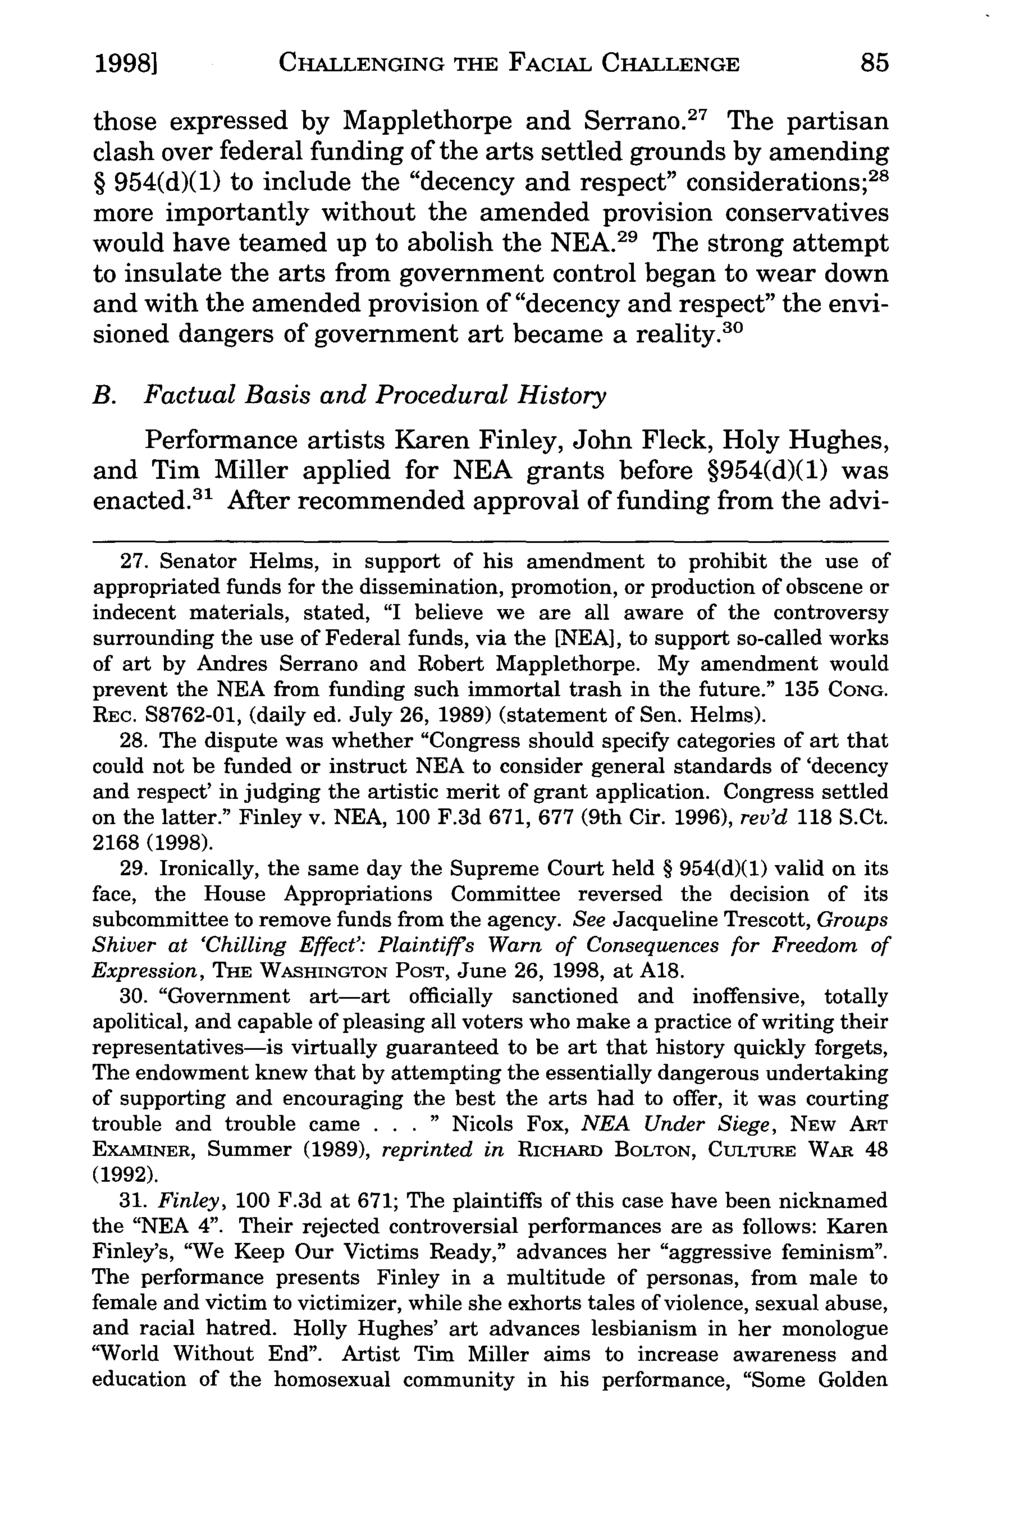 19981 Taft: National CHALLENGING Endowment for THE the Arts FACIAL v. Finley: CHALLENGE Challenging the Facial 85 those expressed by Mapplethorpe and Serrano.